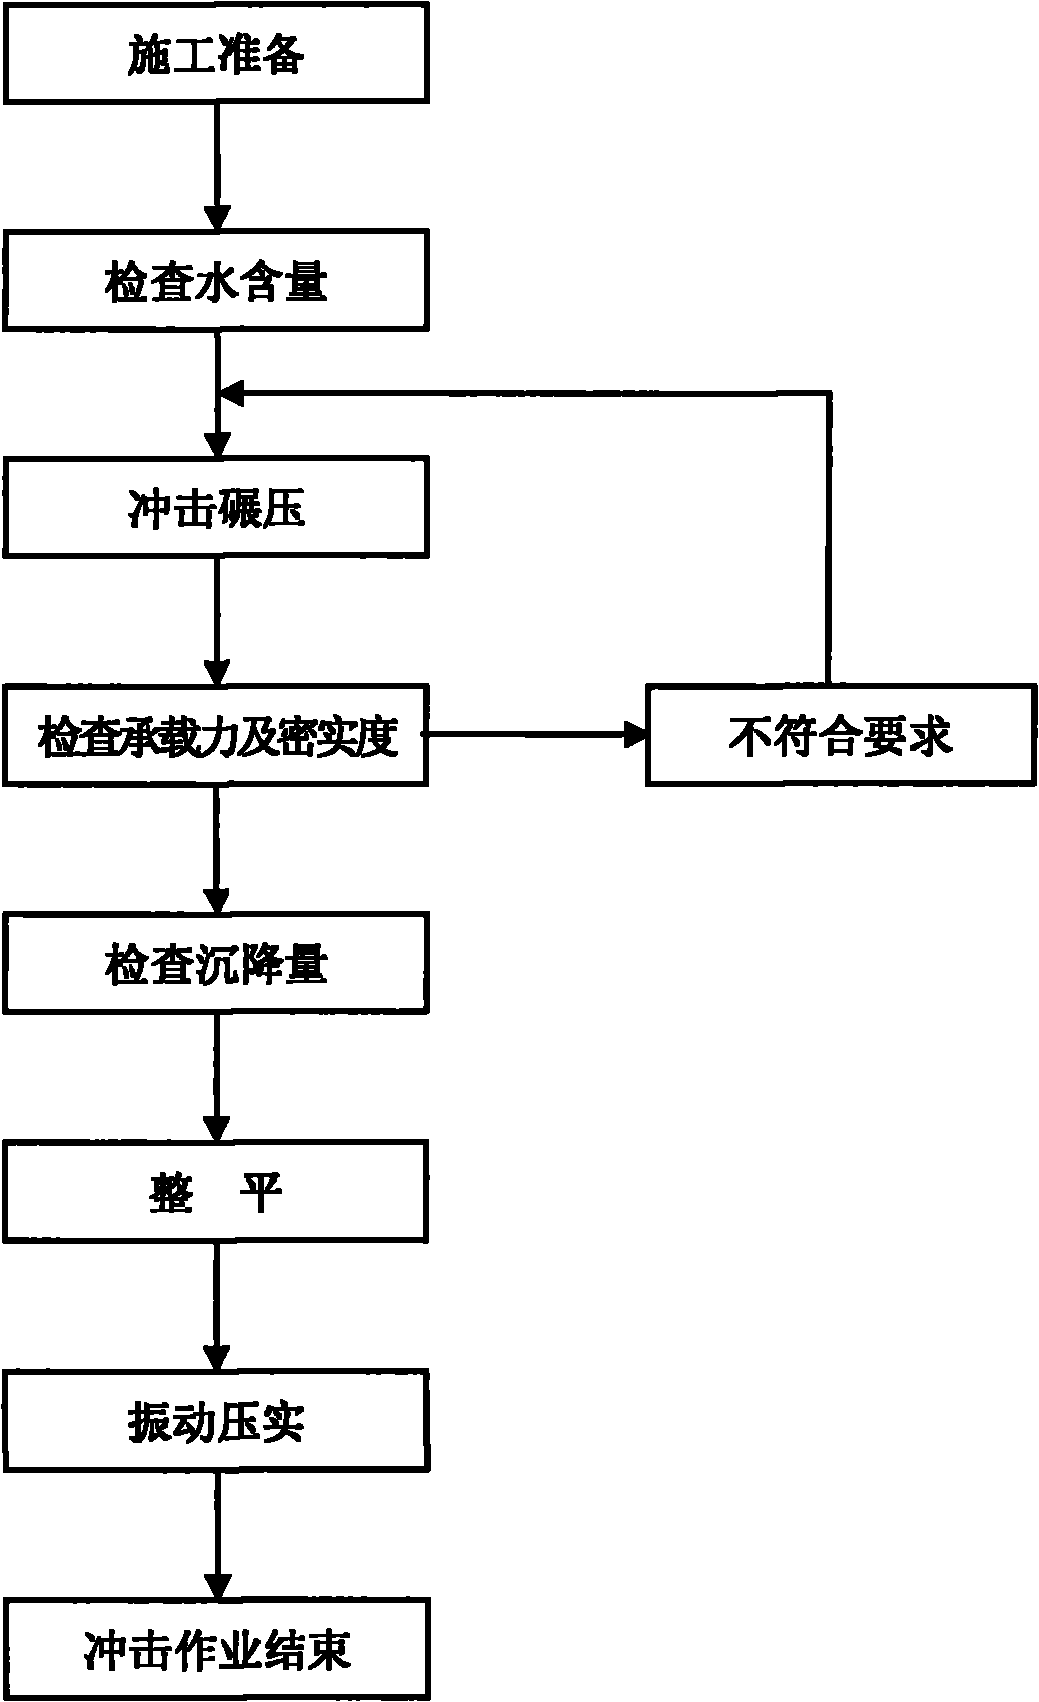 Construction method for processing aeolian sand roadbed base through impacting and grinding